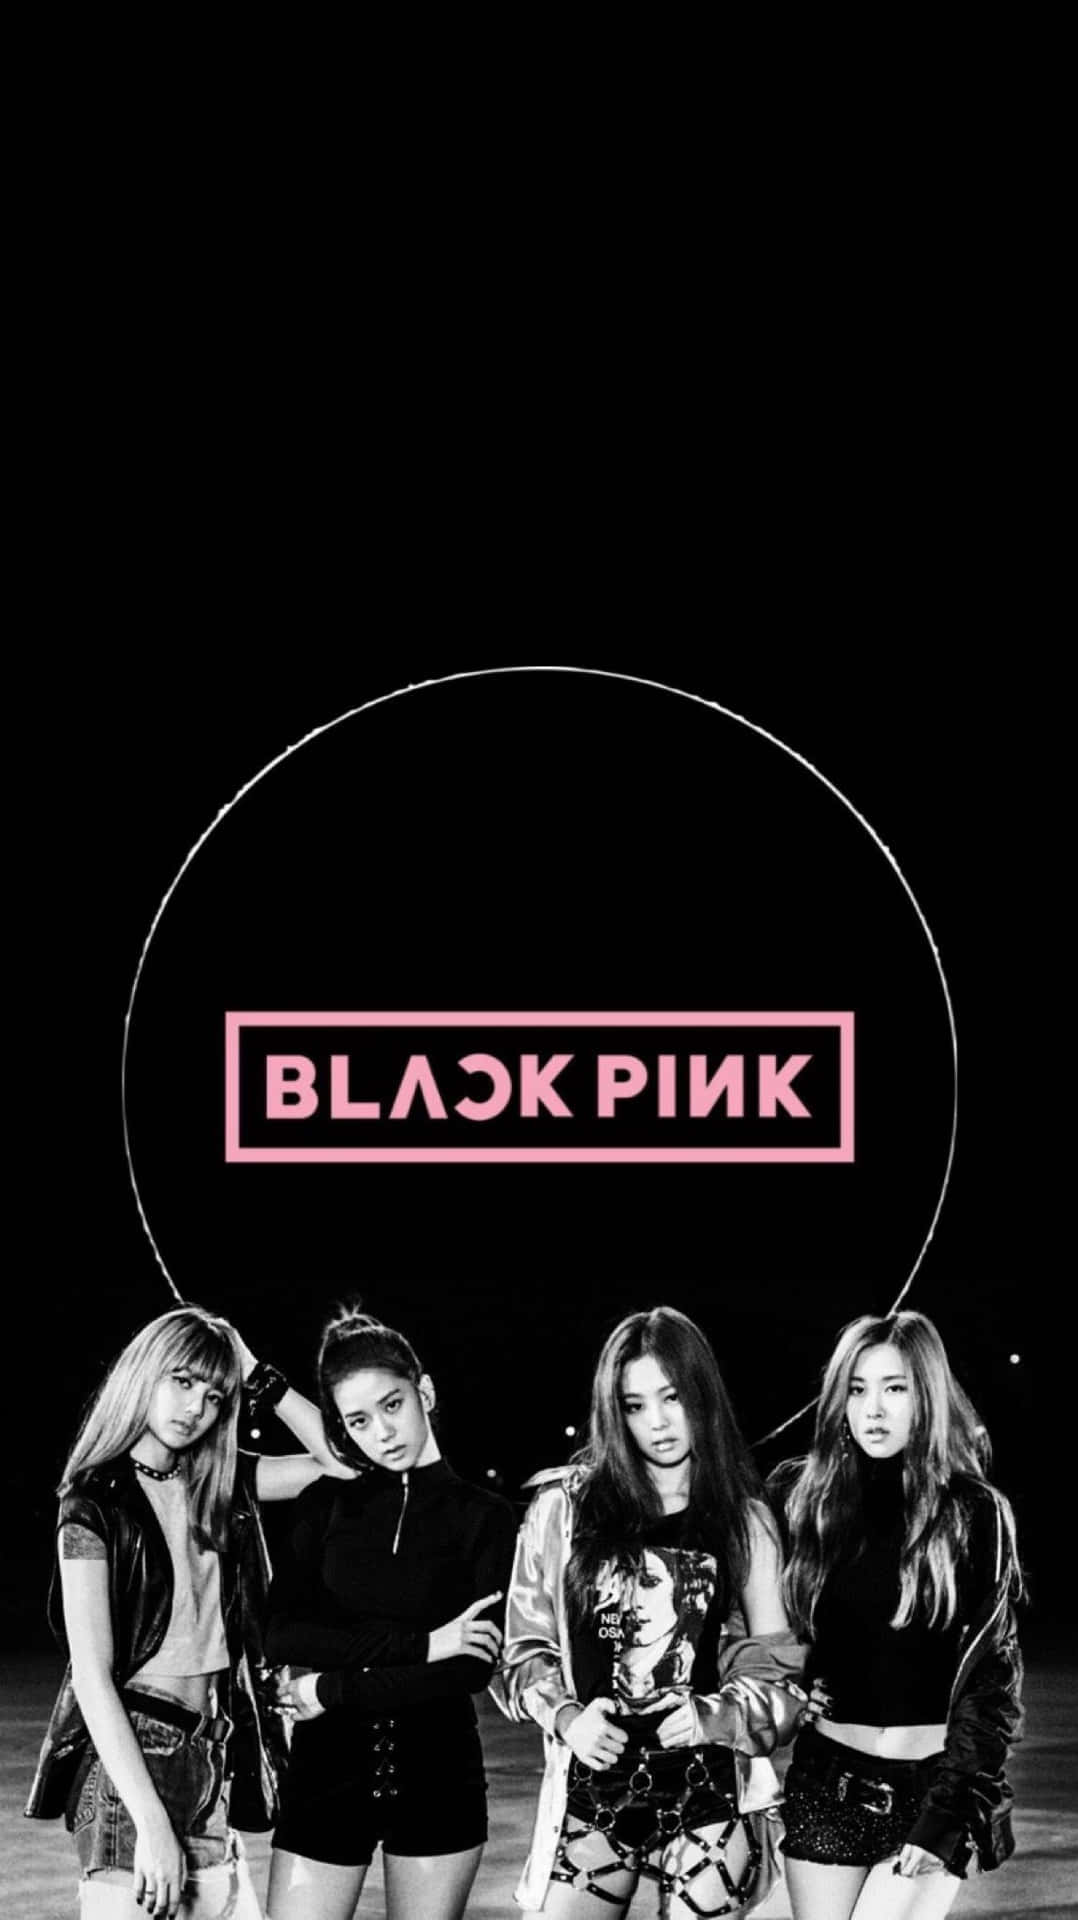 The legendary girl group Blackpink pose for a striking, iconic portrait.